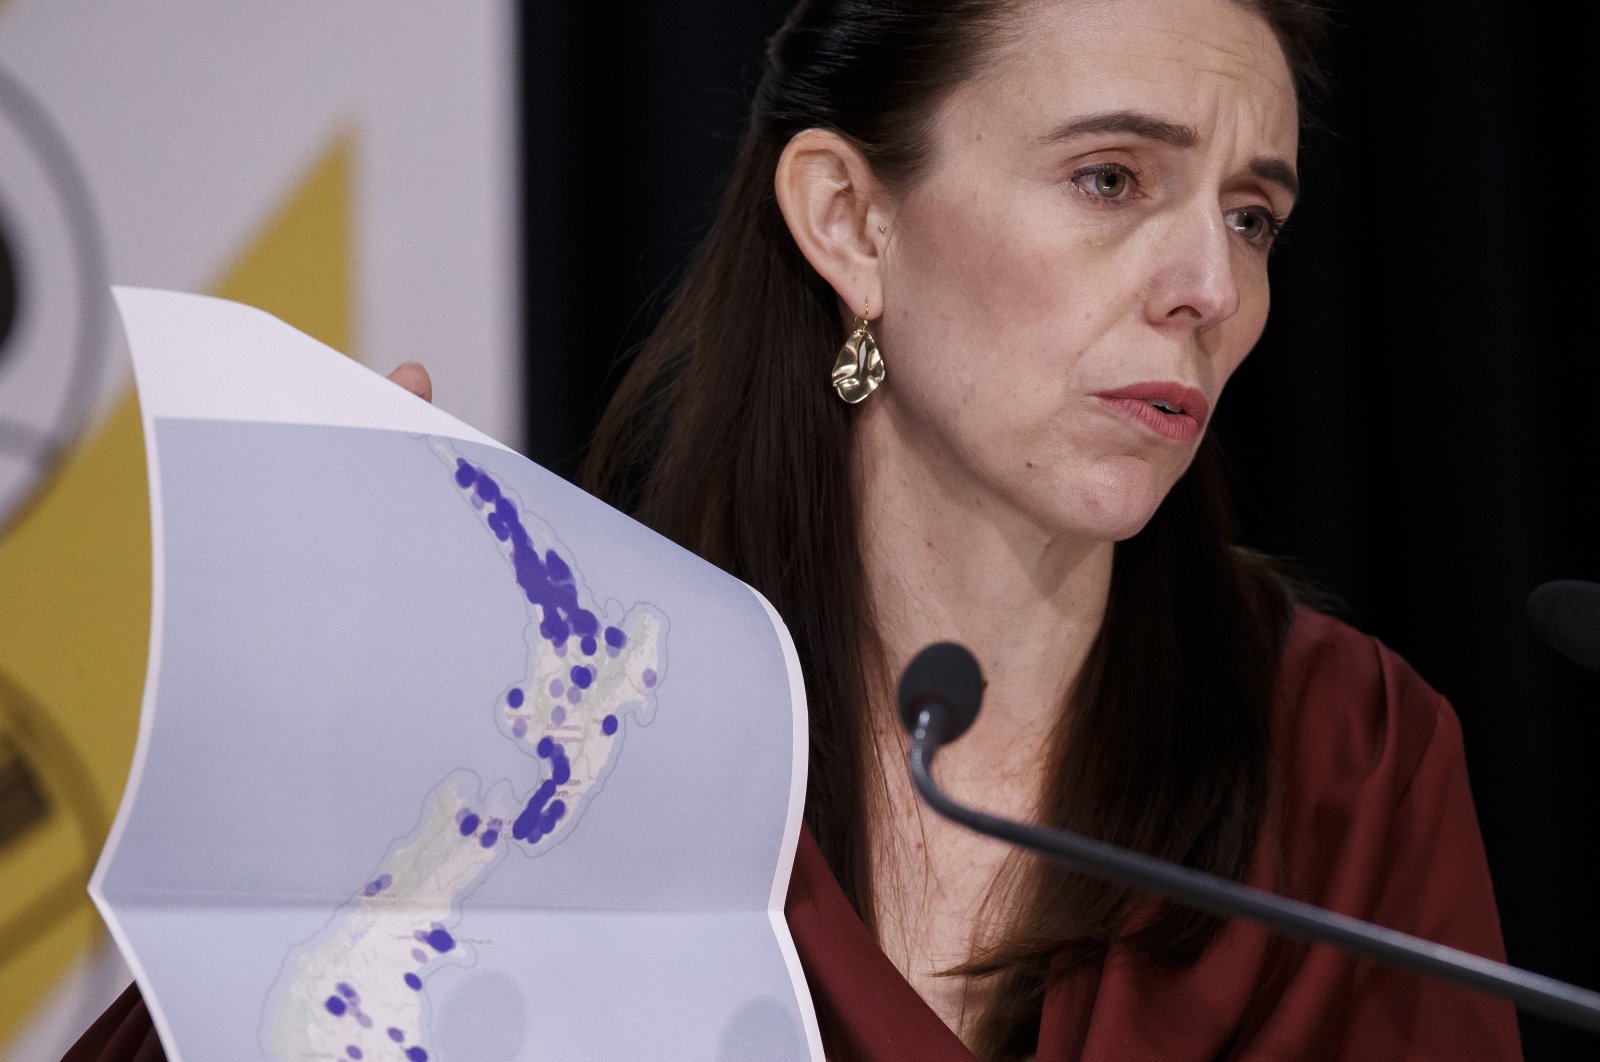 New Zealand Prime Minister Jacinda Ardern holds a map of New Zealand during a COVID-19 update press conference in Wellington, New Zealand, Monday, Aug. 23, 2021. (AP Photo)